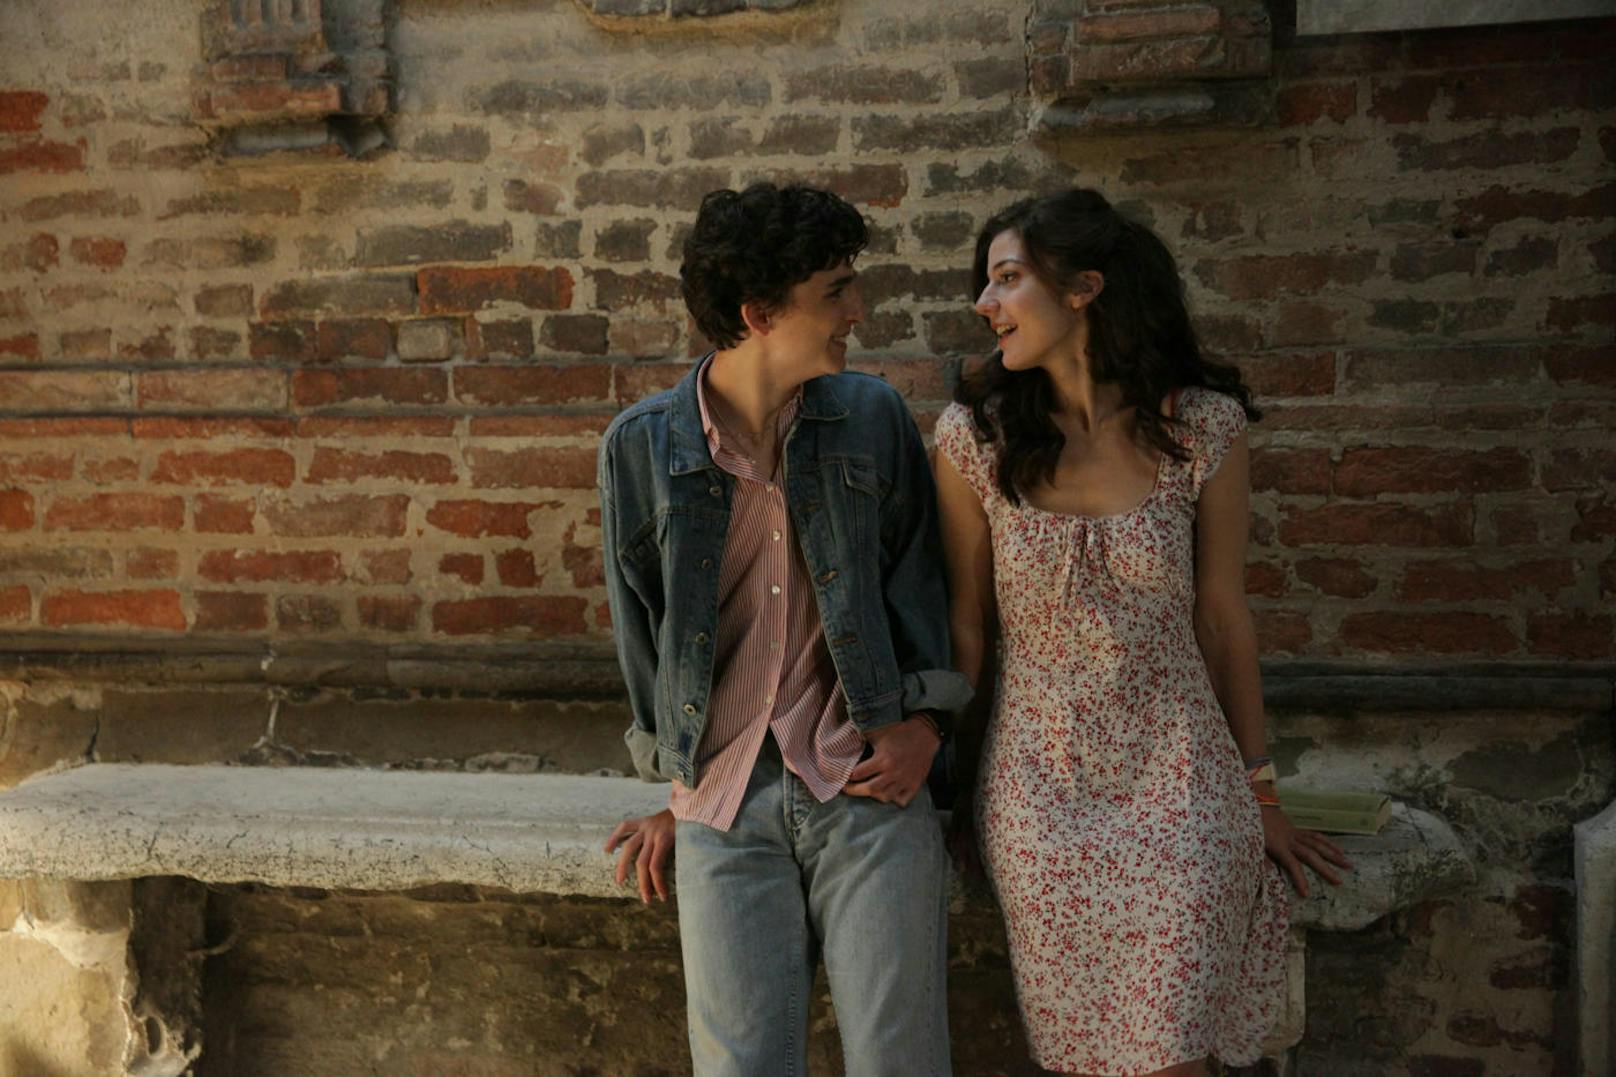 Timothée Chalamet und Esther Garrel in "Call Me By Your Name"